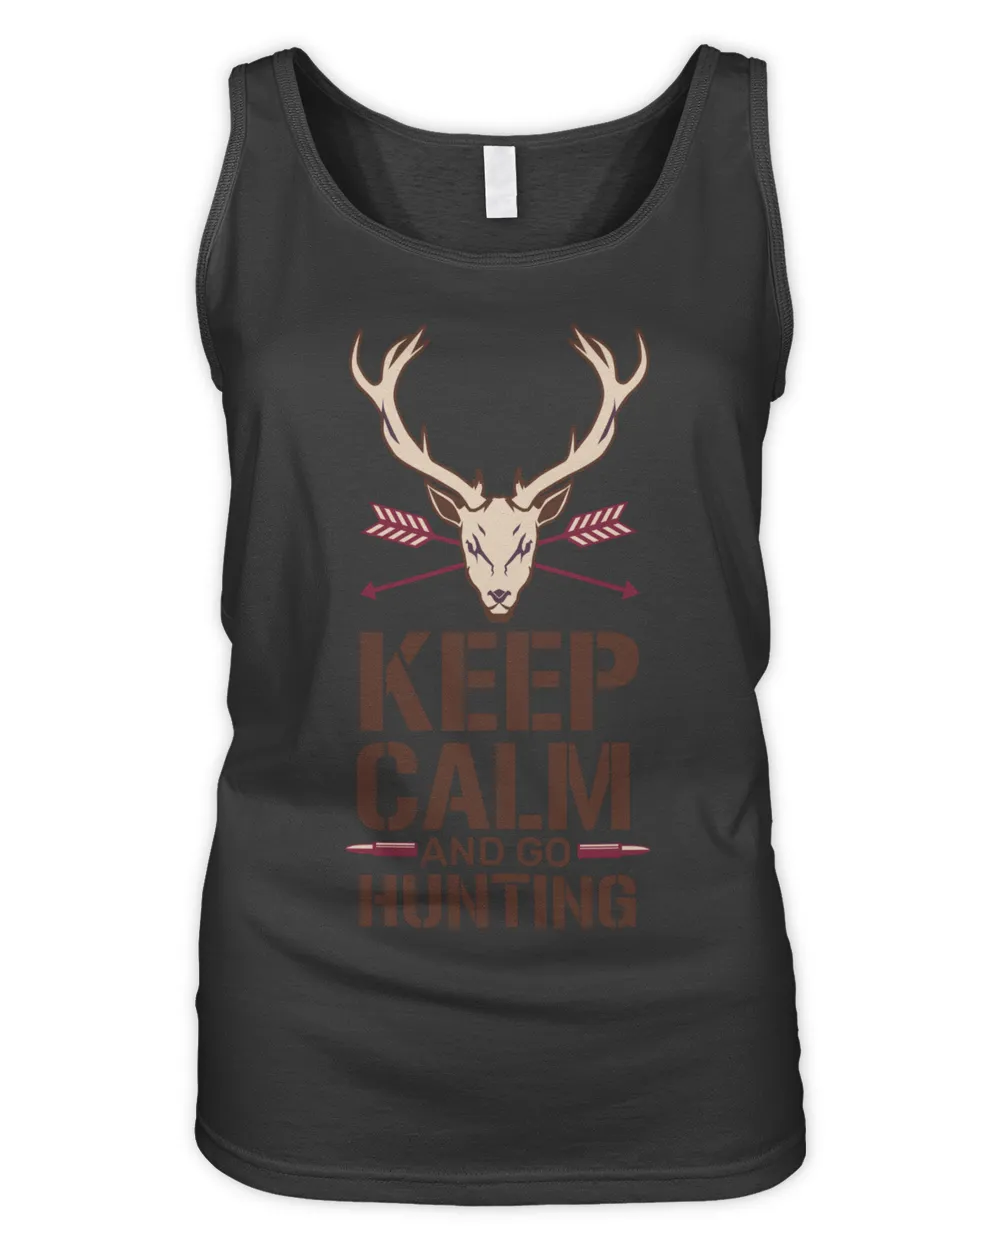 Keep Calm and Go Hunting